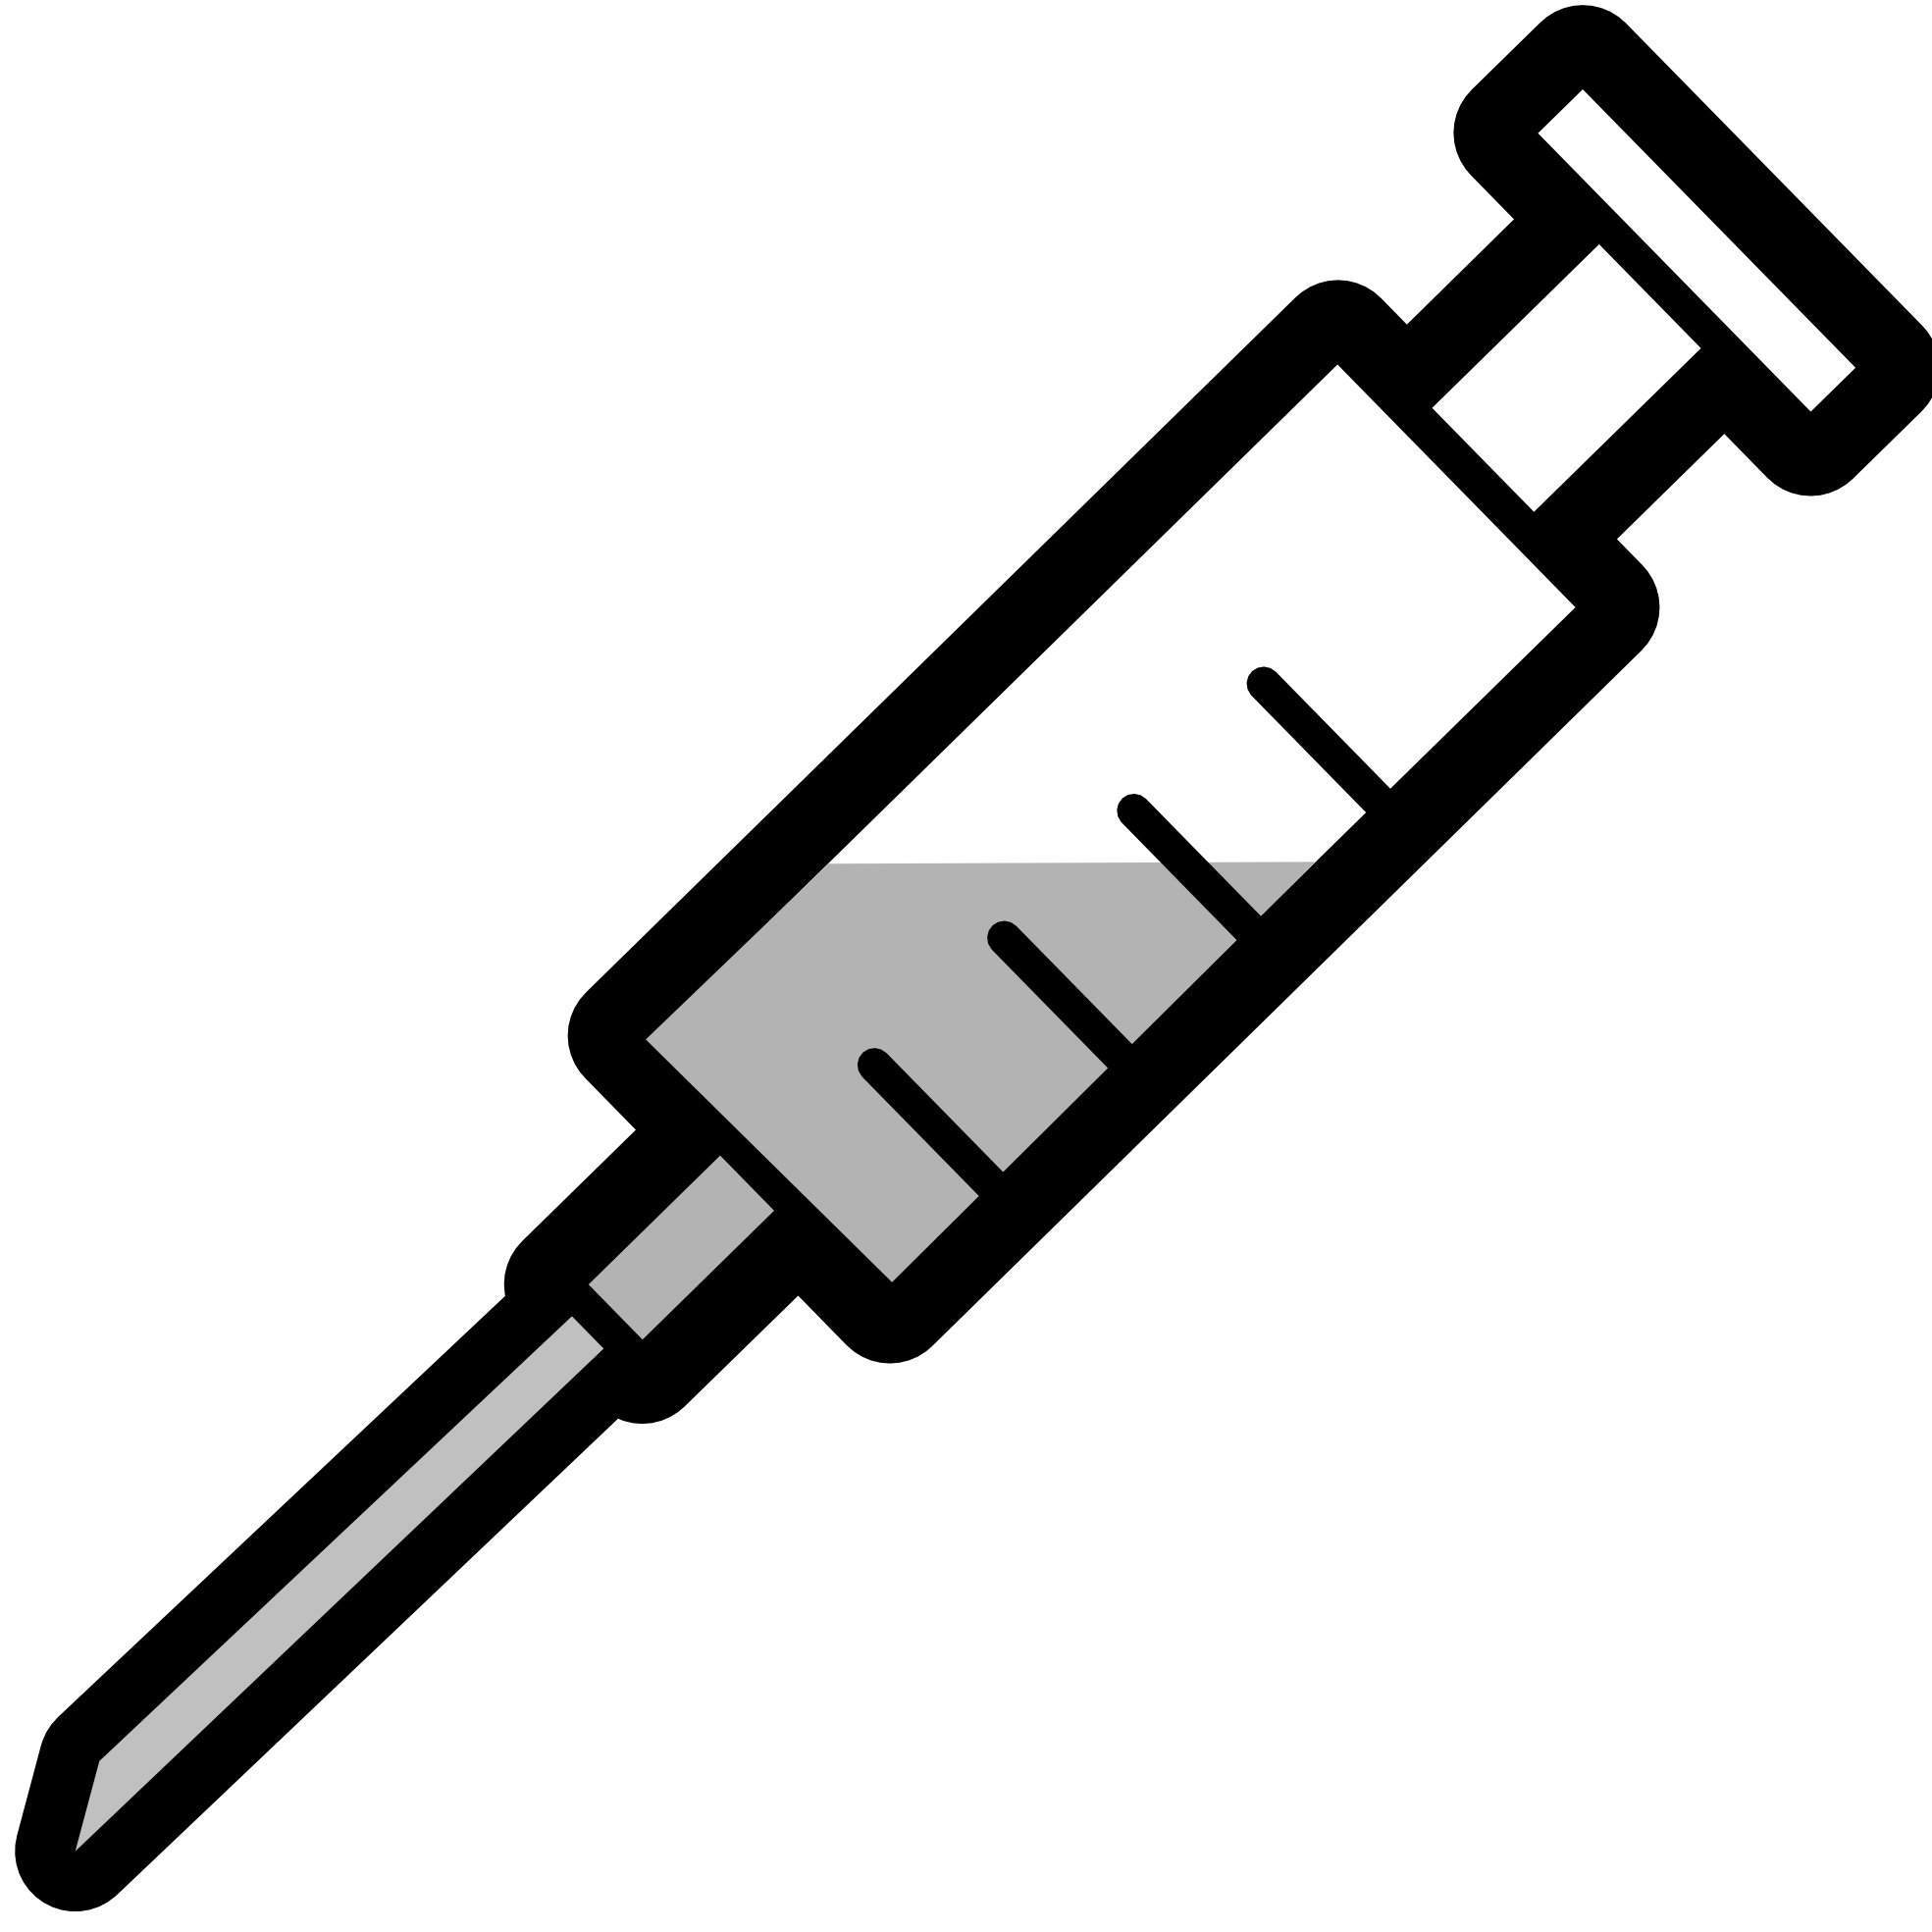  collection of doctor. Medicine clipart needle